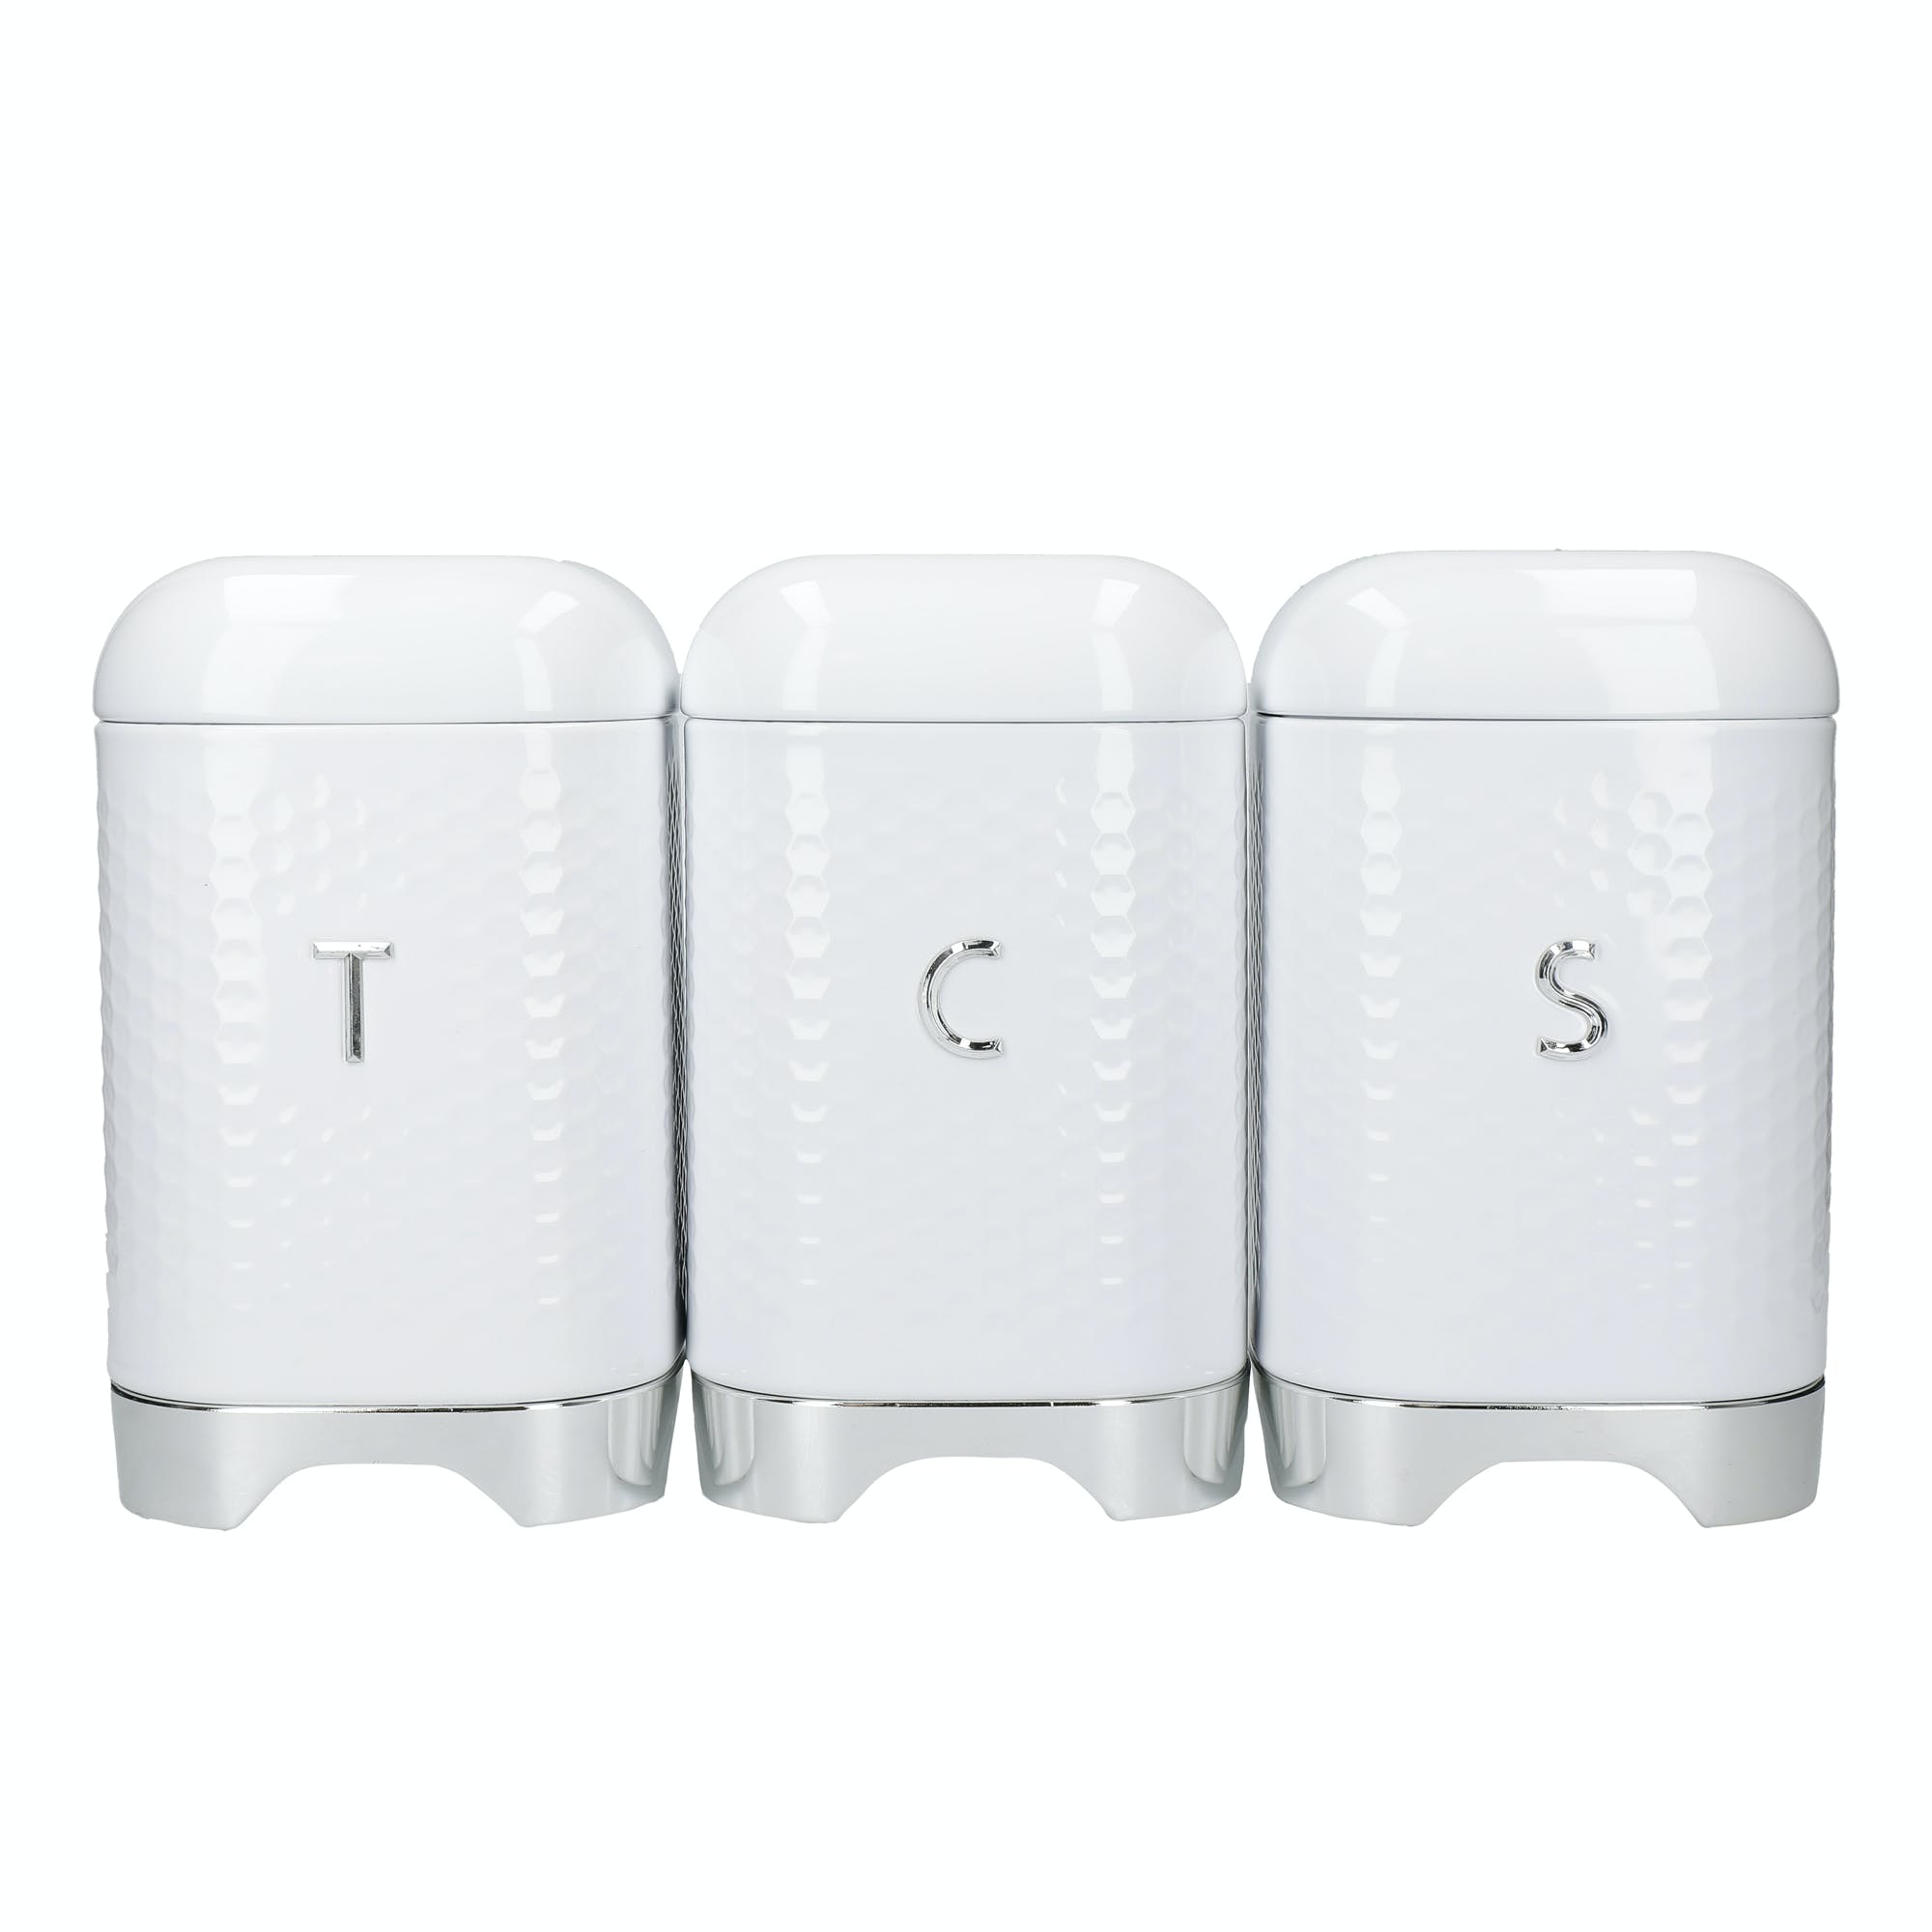 KitchenCraft Lovello Tea, Coffee and Sugar Storage Canisters Set Ice White - The Cooks Cupboard Ltd